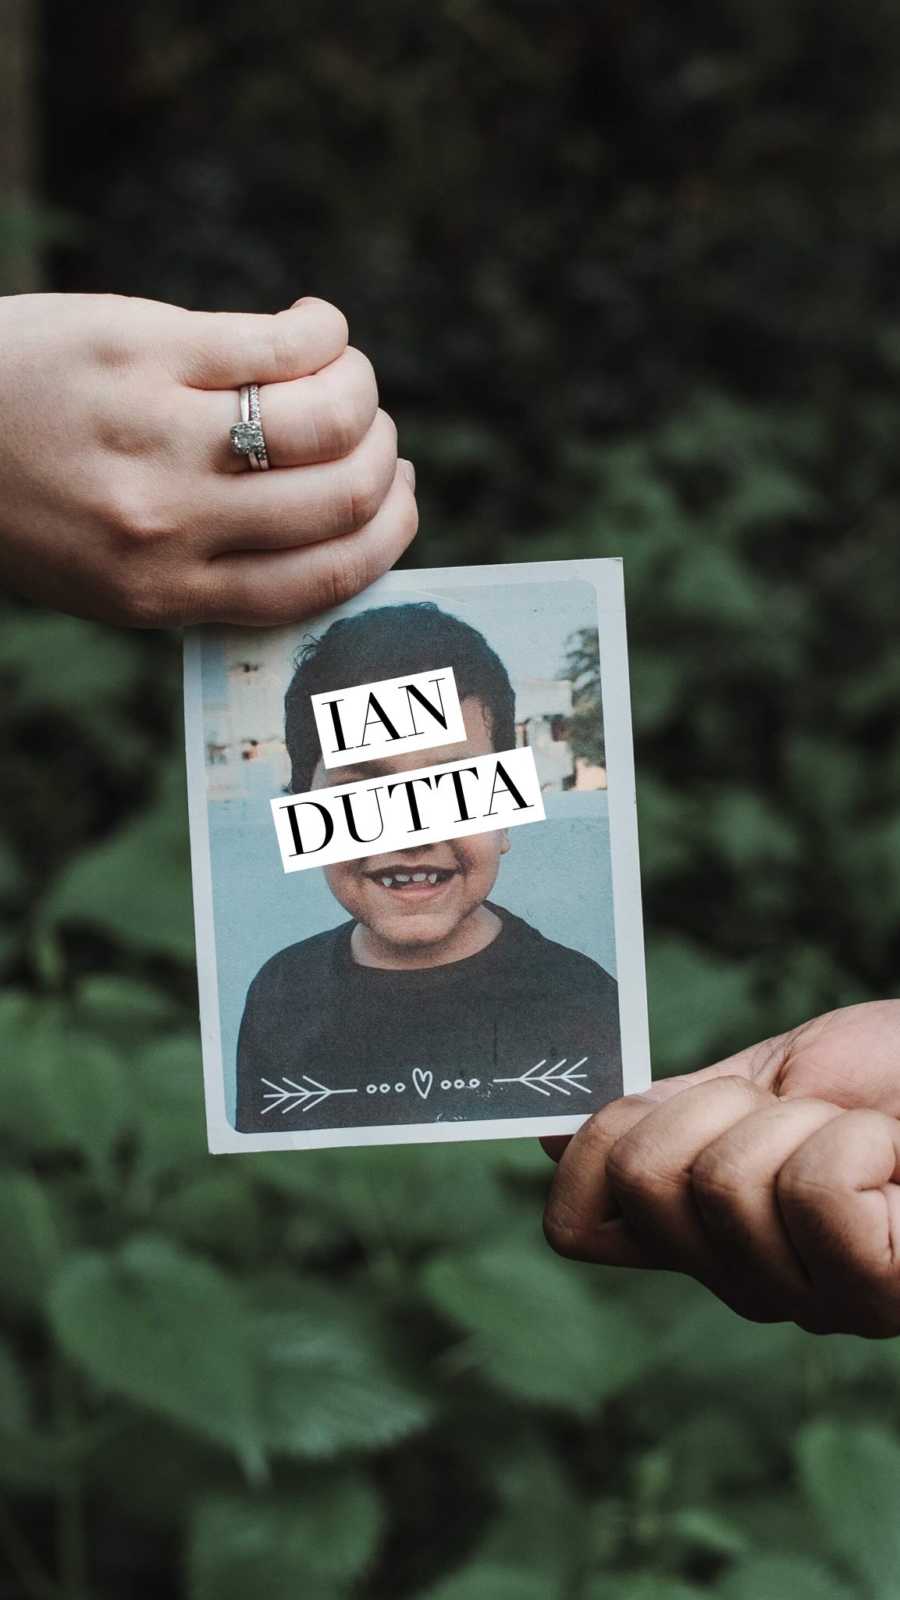 Close up of married woman's hand holding picture of little boy she will adopt with name, "Ian Dutta"